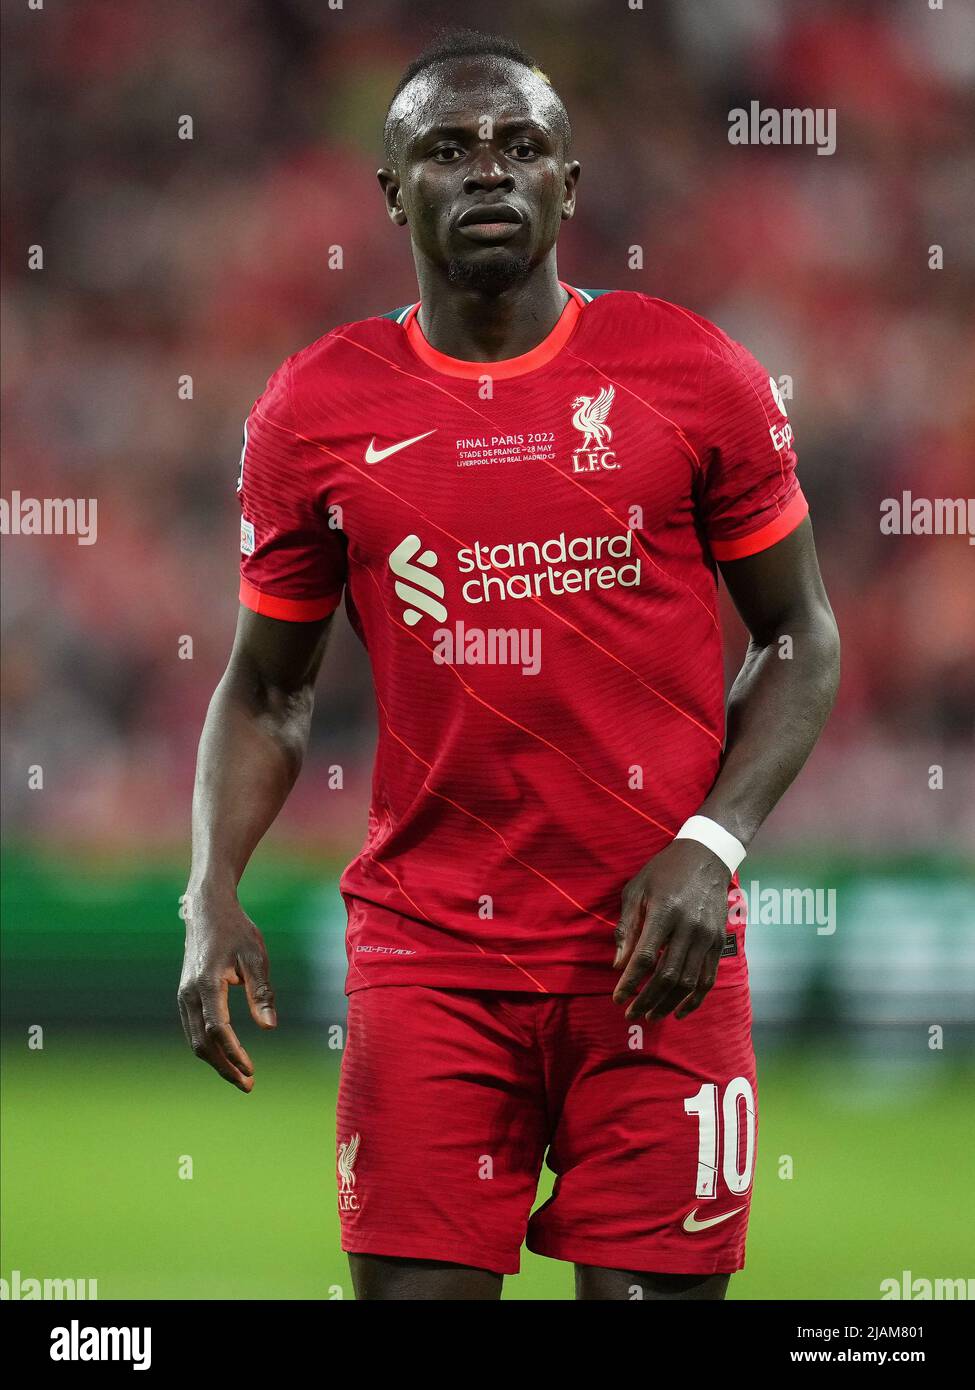 Sadio Mane of Liverpool FC during the UEFA Champions League Final match between Liverpool FC and Real Madrid played at Stade de France on May 28, 2022 in Paris, France. (Photo by Magma) Stock Photo